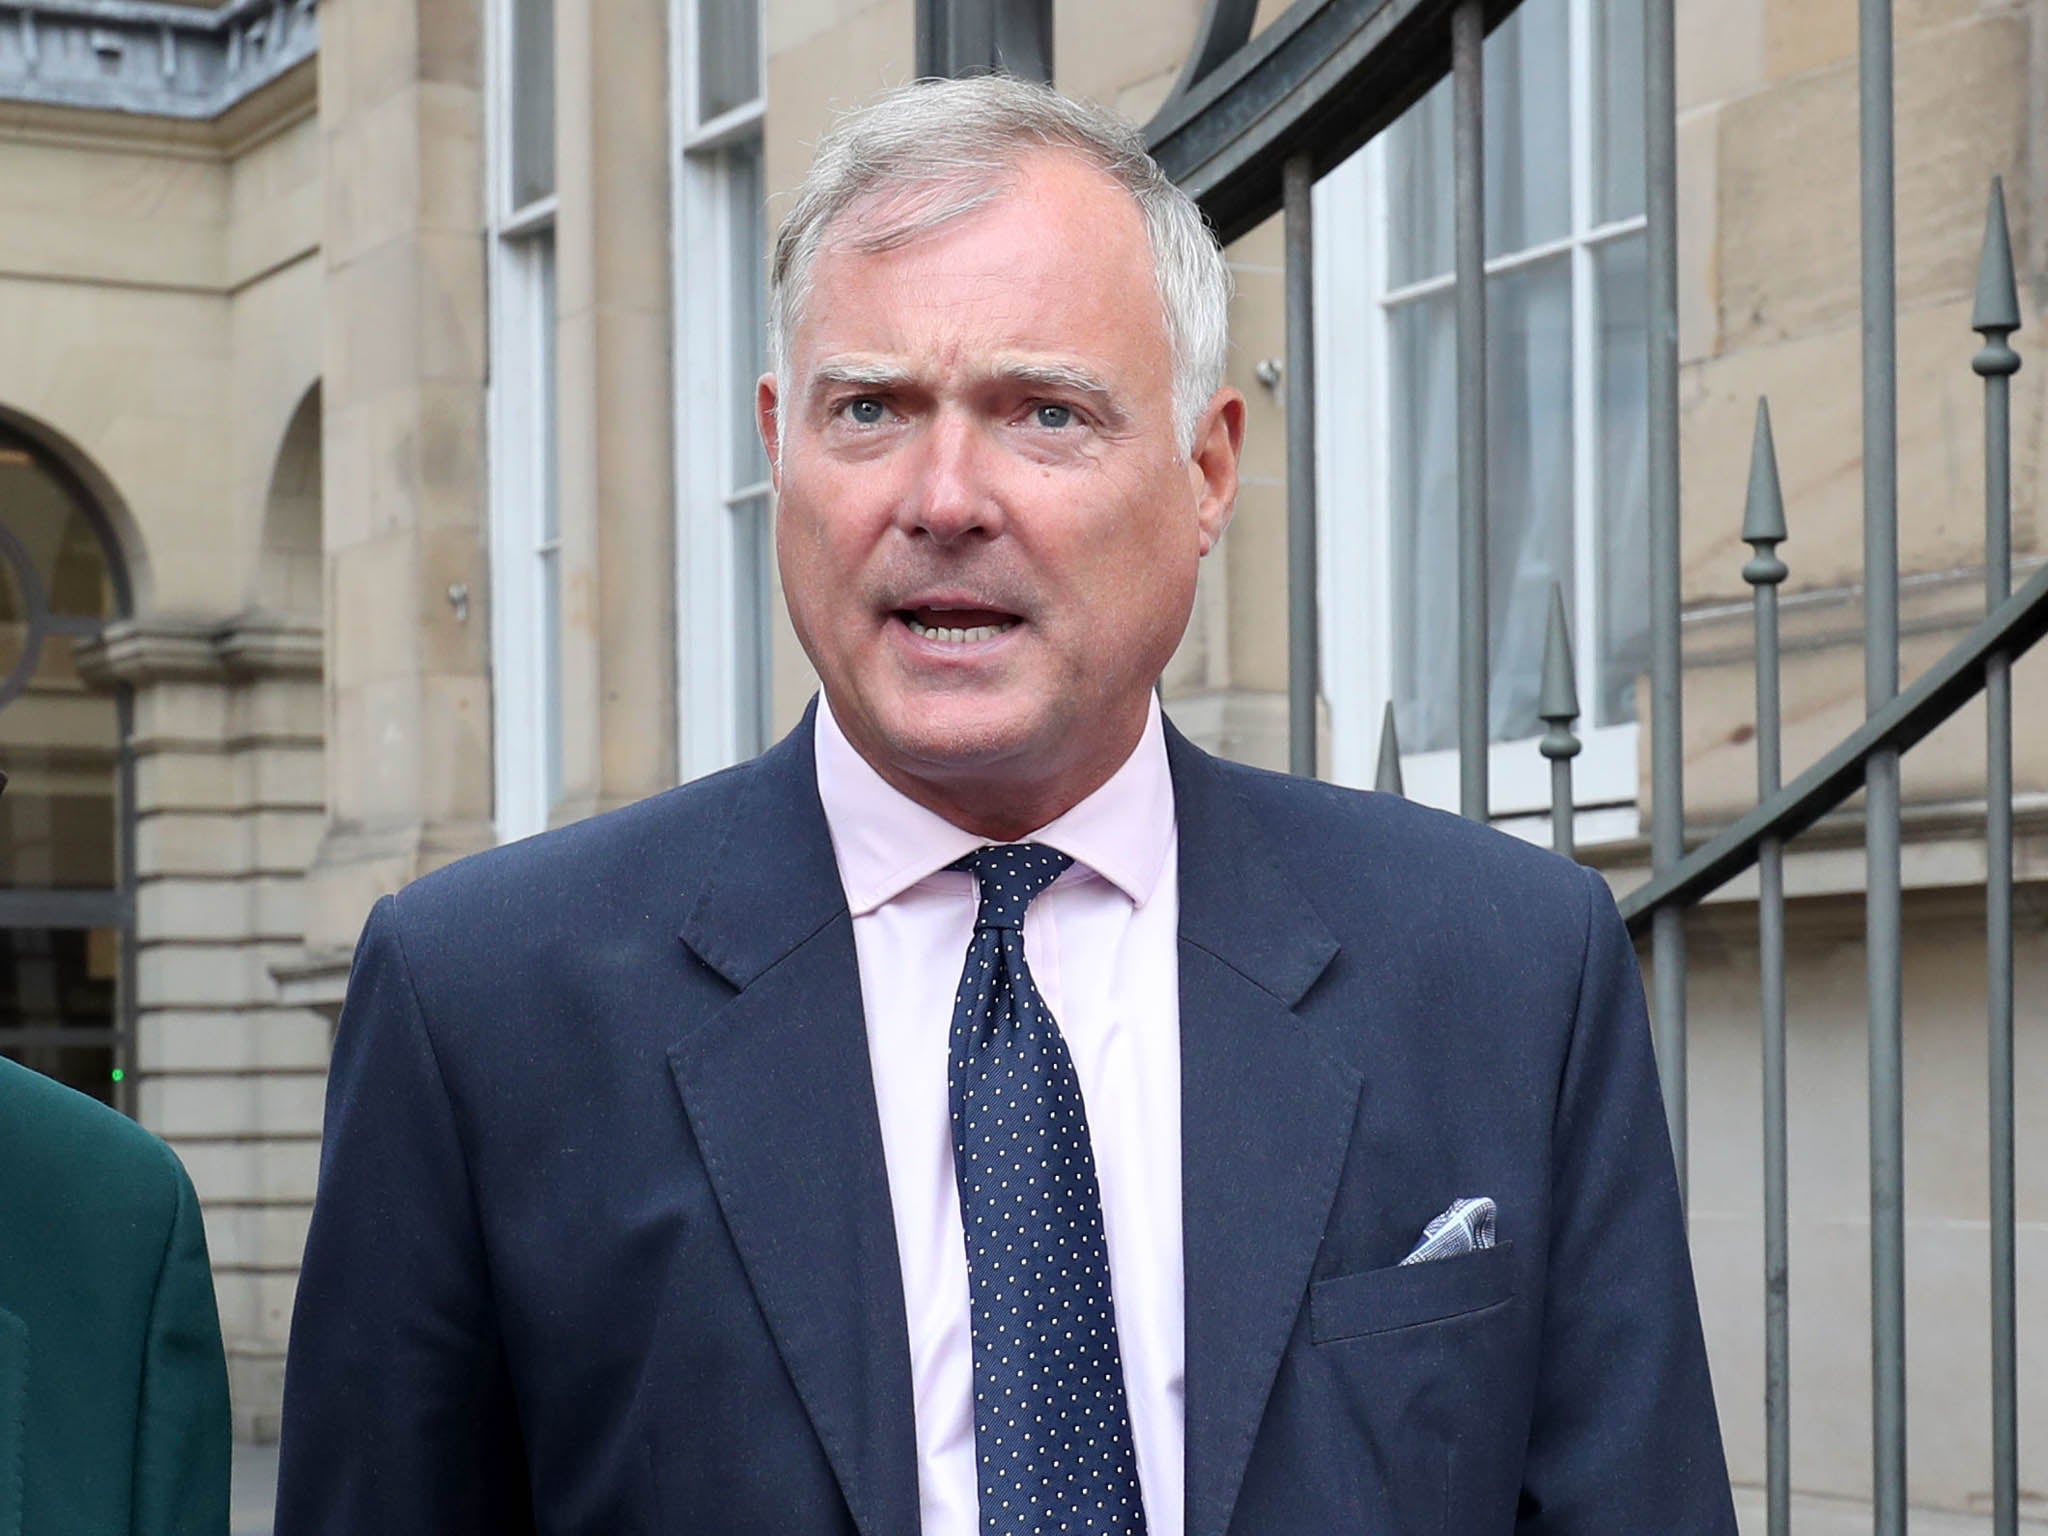 Former TV presenter John Leslie leaving Edinburgh Sheriff Court in 2018 after being acquitted of sexually assaulting a woman in an Edinburgh nightclub